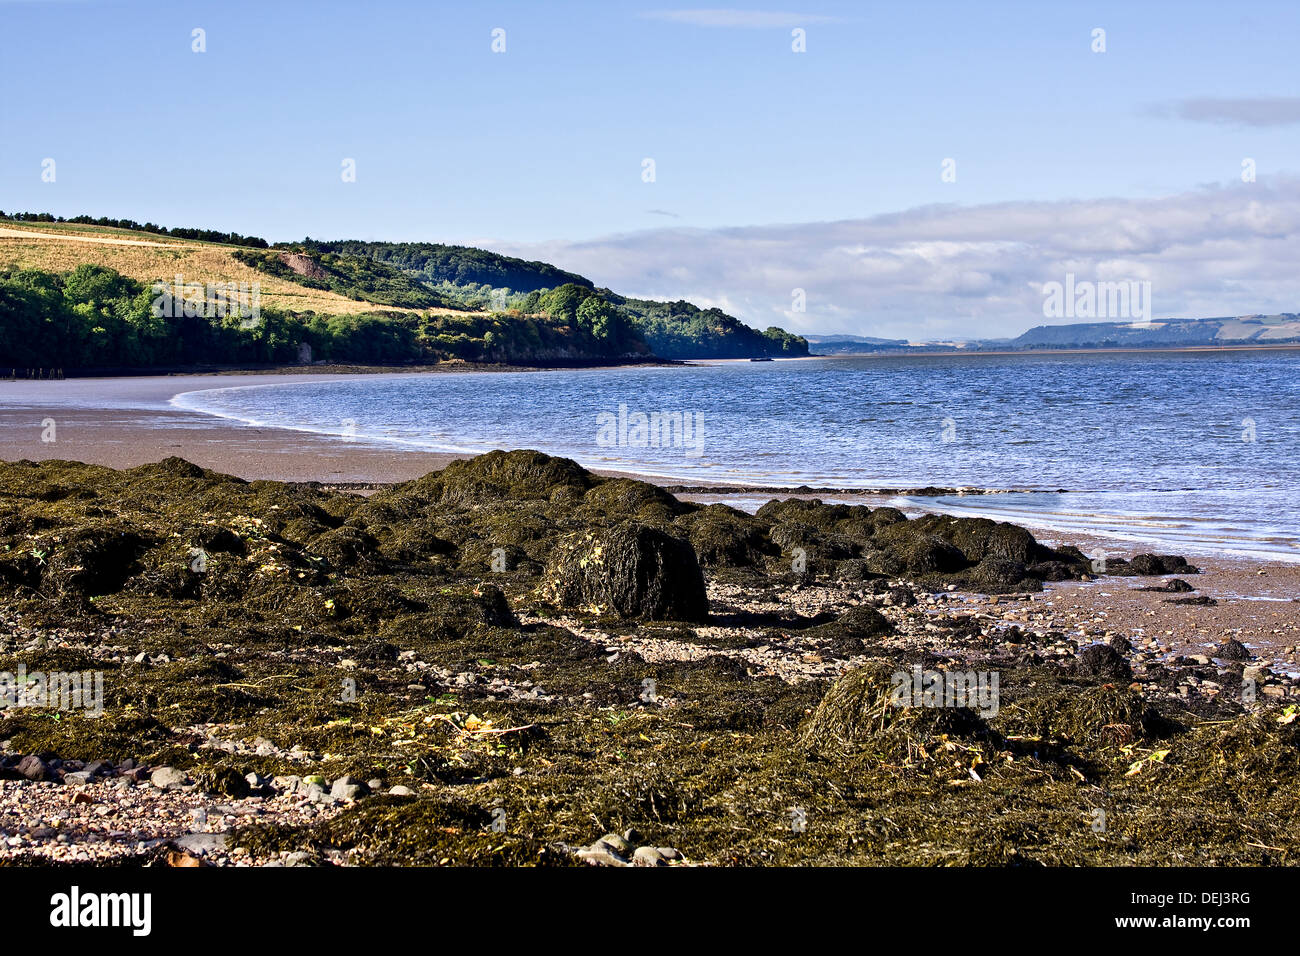 Landscape view of the River Tay and Beach from Wormit in Fife County. UK Stock Photo